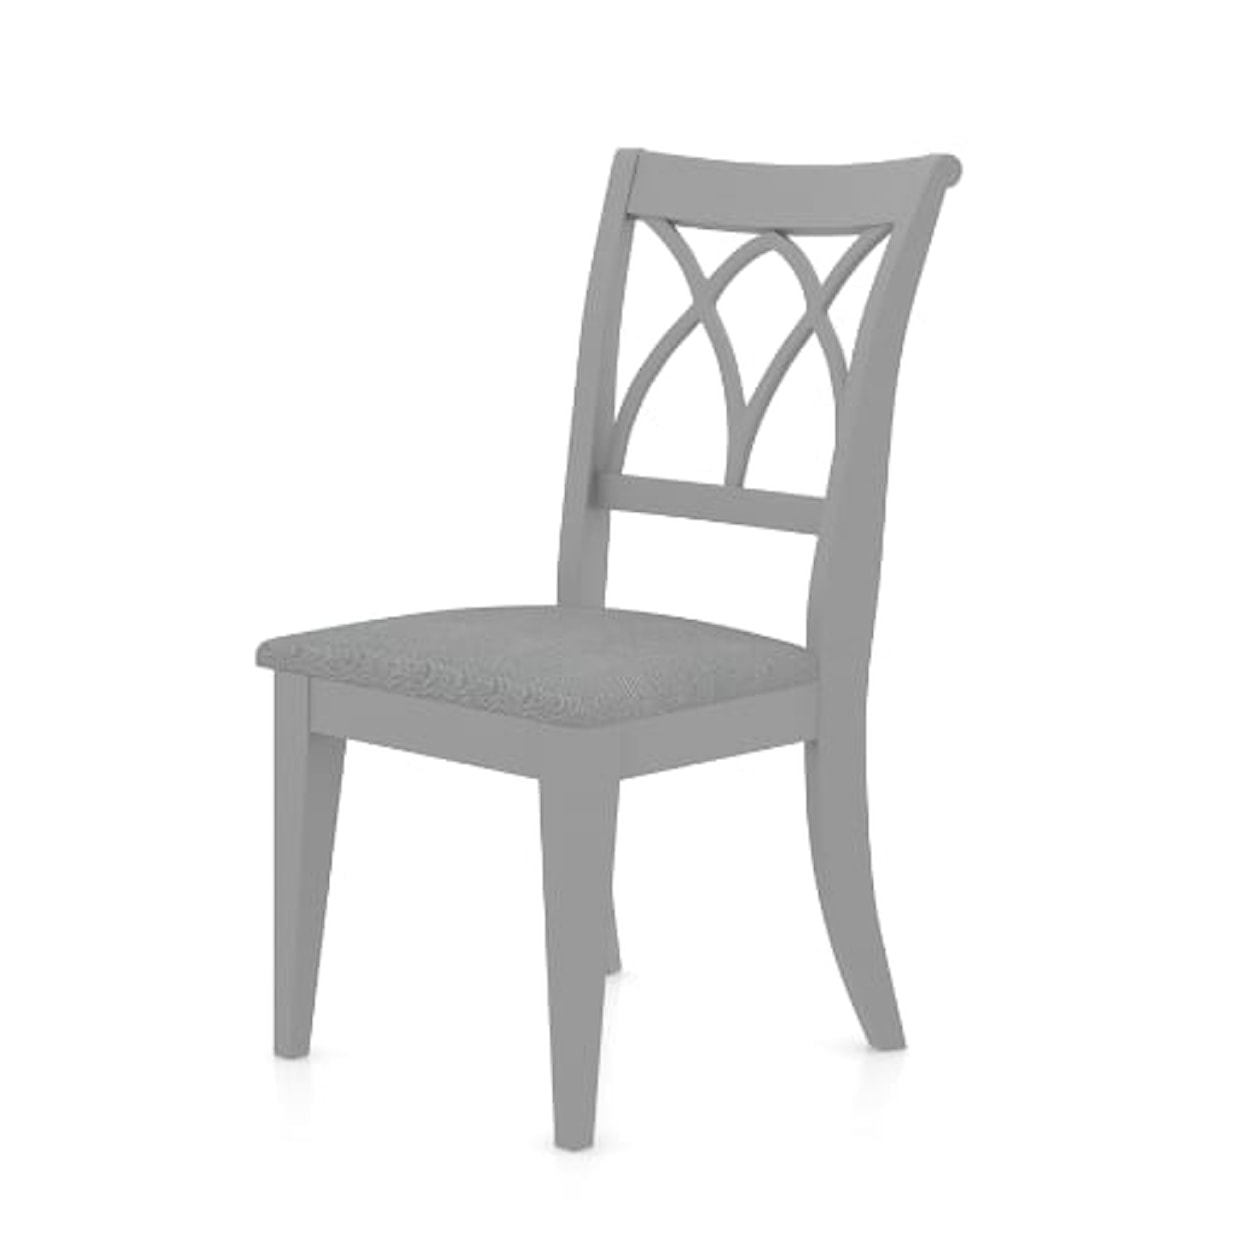 Canadel Gourmet Gourmet Upholstered Seat Dining Side Chair